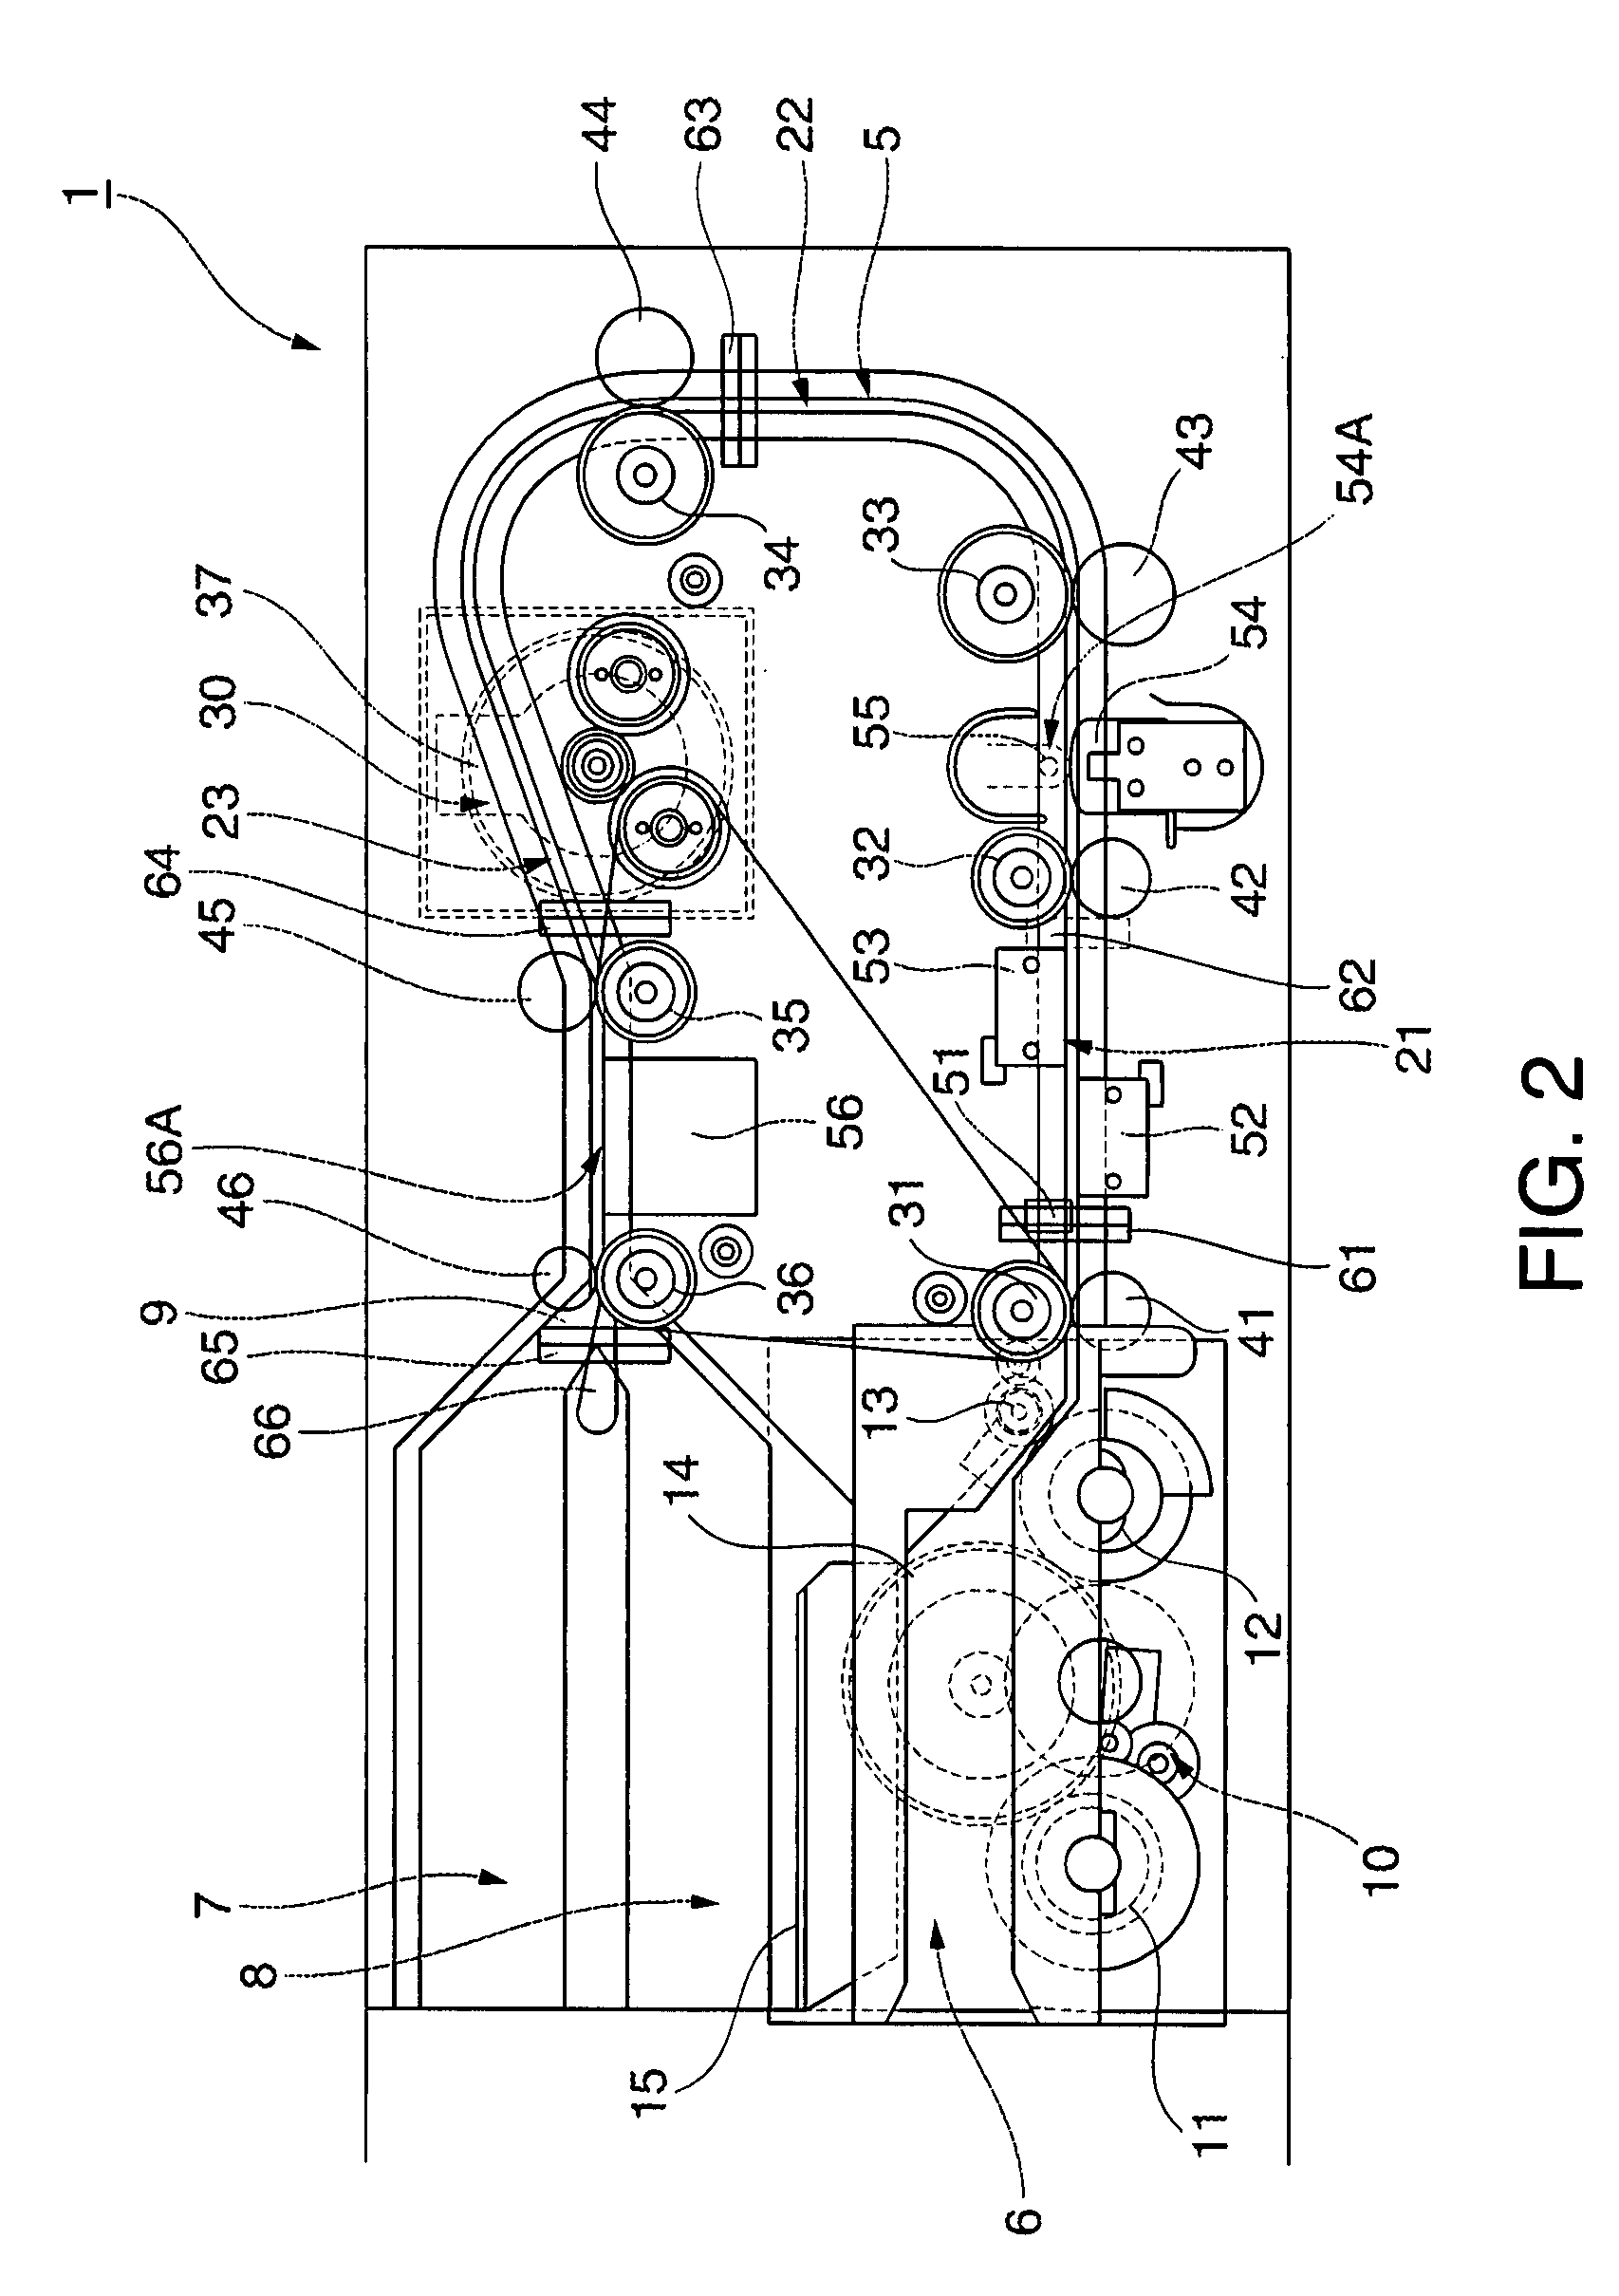 Processing method and apparatus for recording media having printed magnetic ink characters